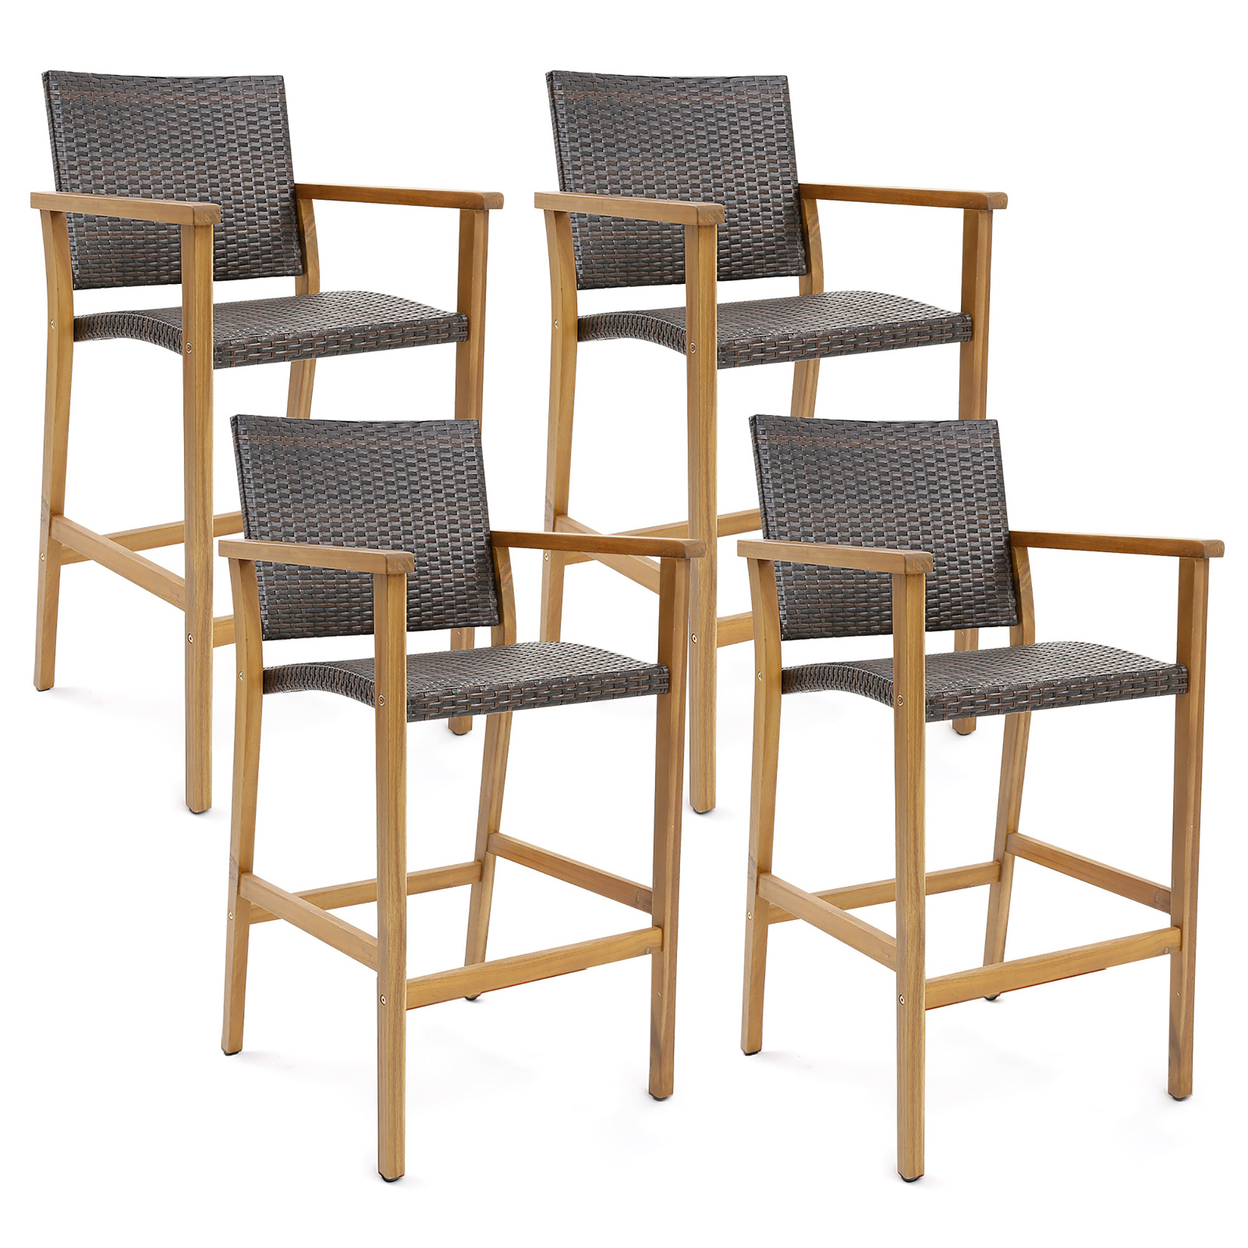 Patio Rattan Bar Stool Set Of 4 Outdoor PE Wicker Bar Chairs W/ Armrests & Sturdy Footrests